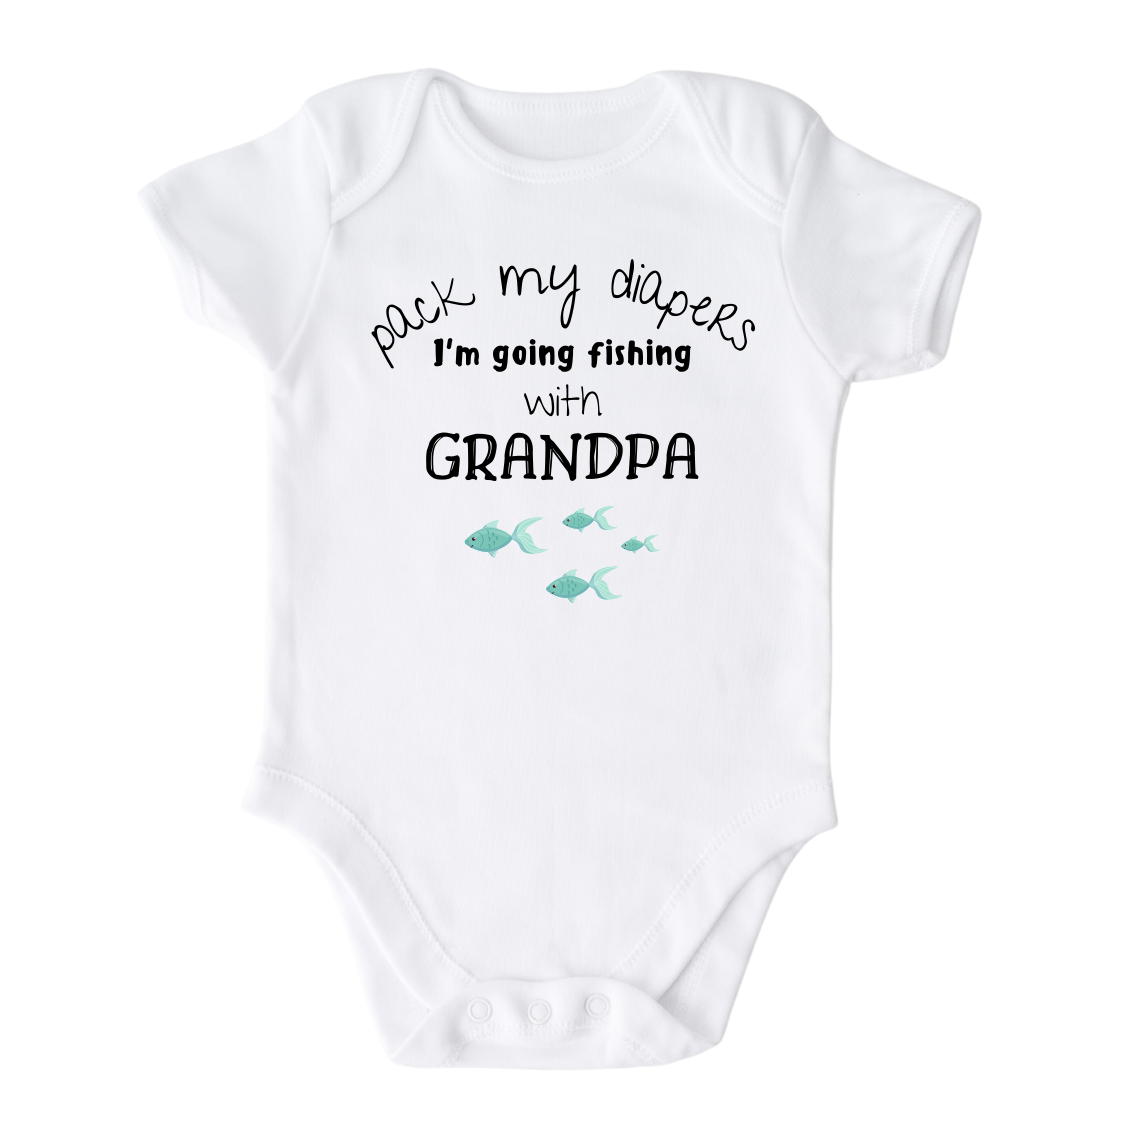 Pack My Diapers I'm Going Fishing with Grandpa Baby Onesie Cute Baby Outfit for Baby Gift 2T Shirt / Short Sleeve White